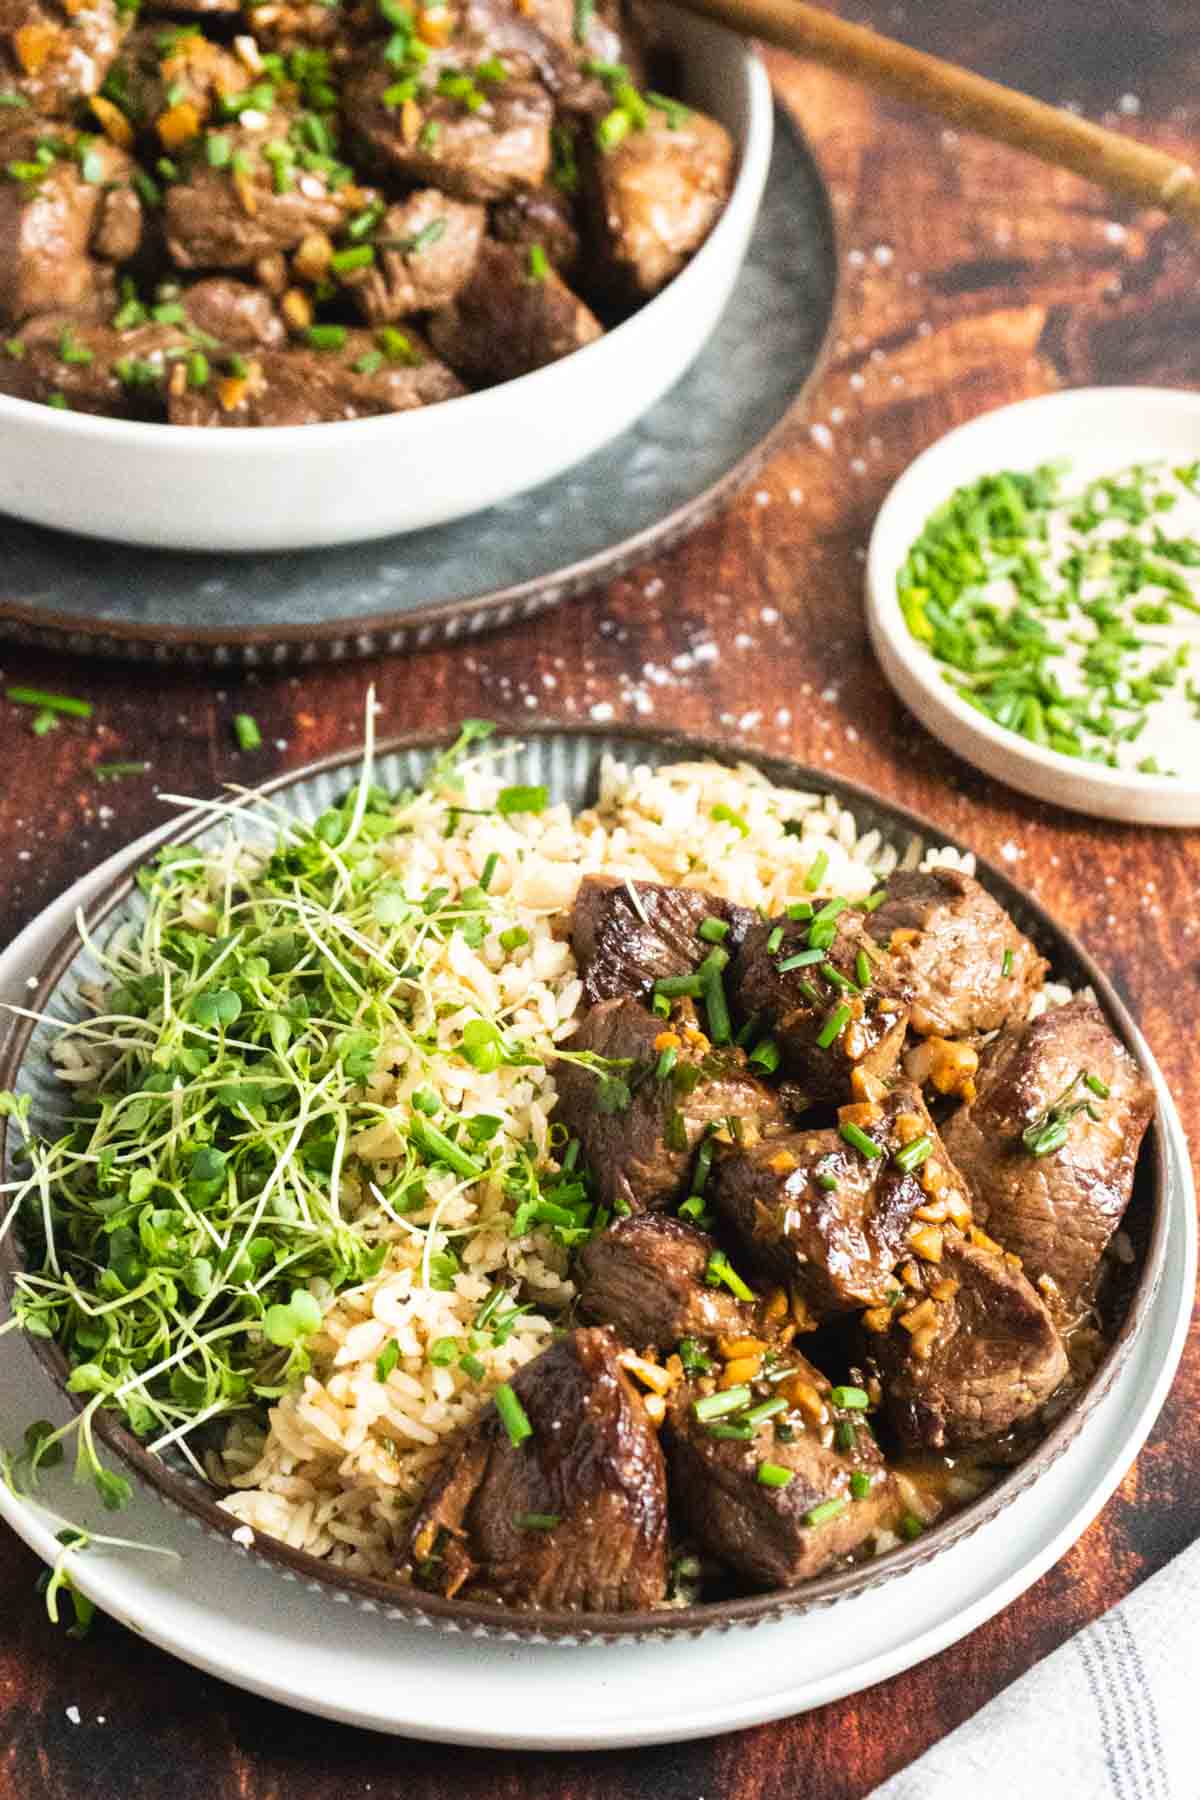 Steak bites served over rice with a salad.